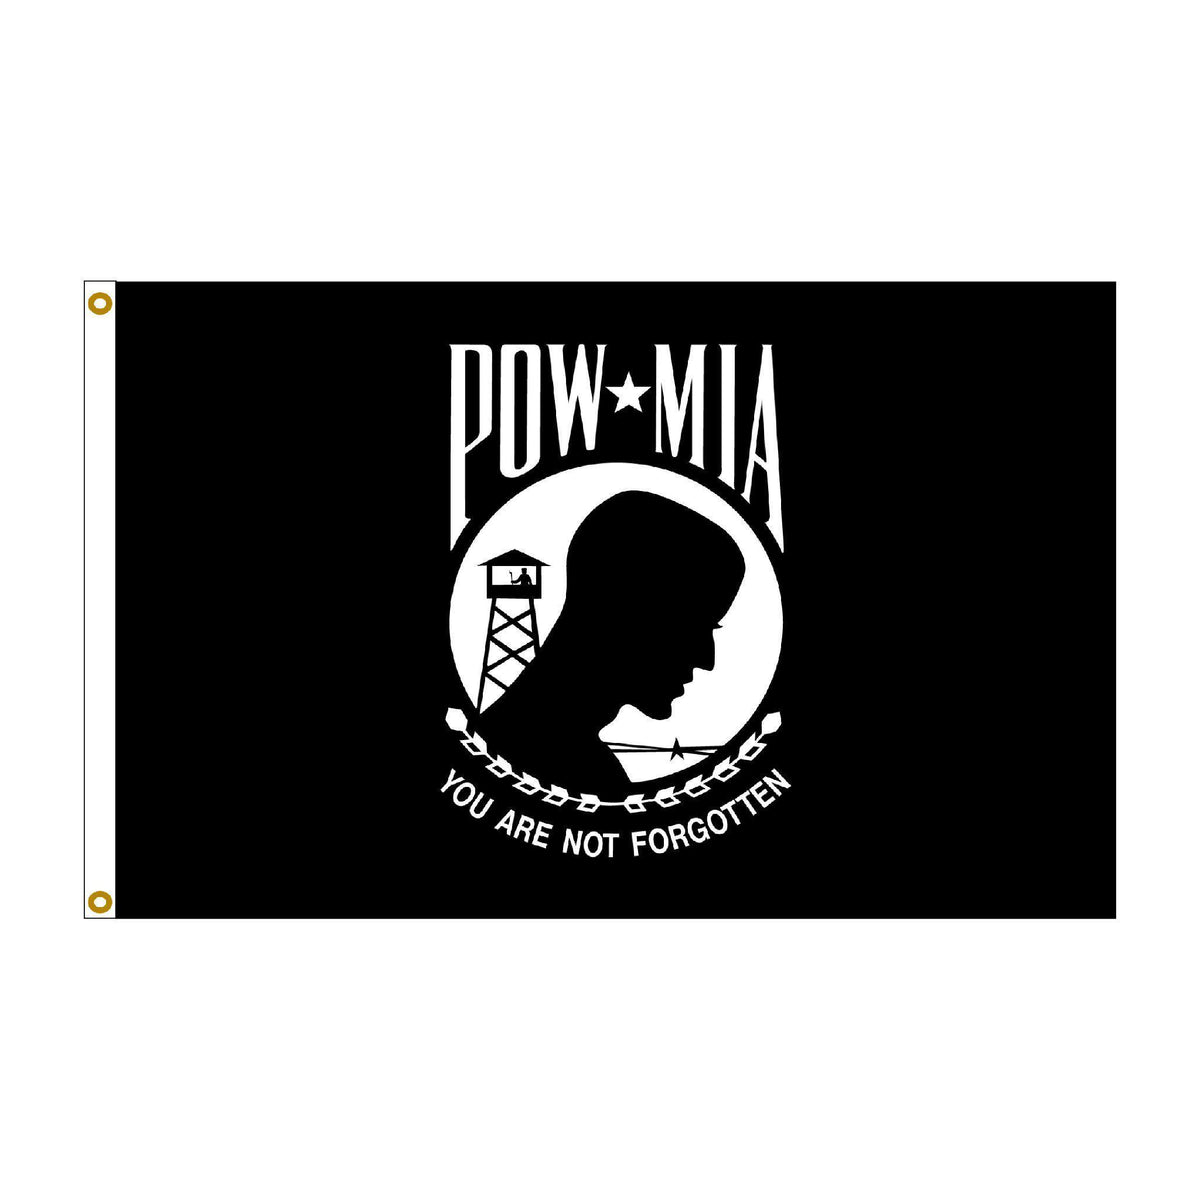 POW-MIA Flags in polyester fabric fly well in high-wind areas.